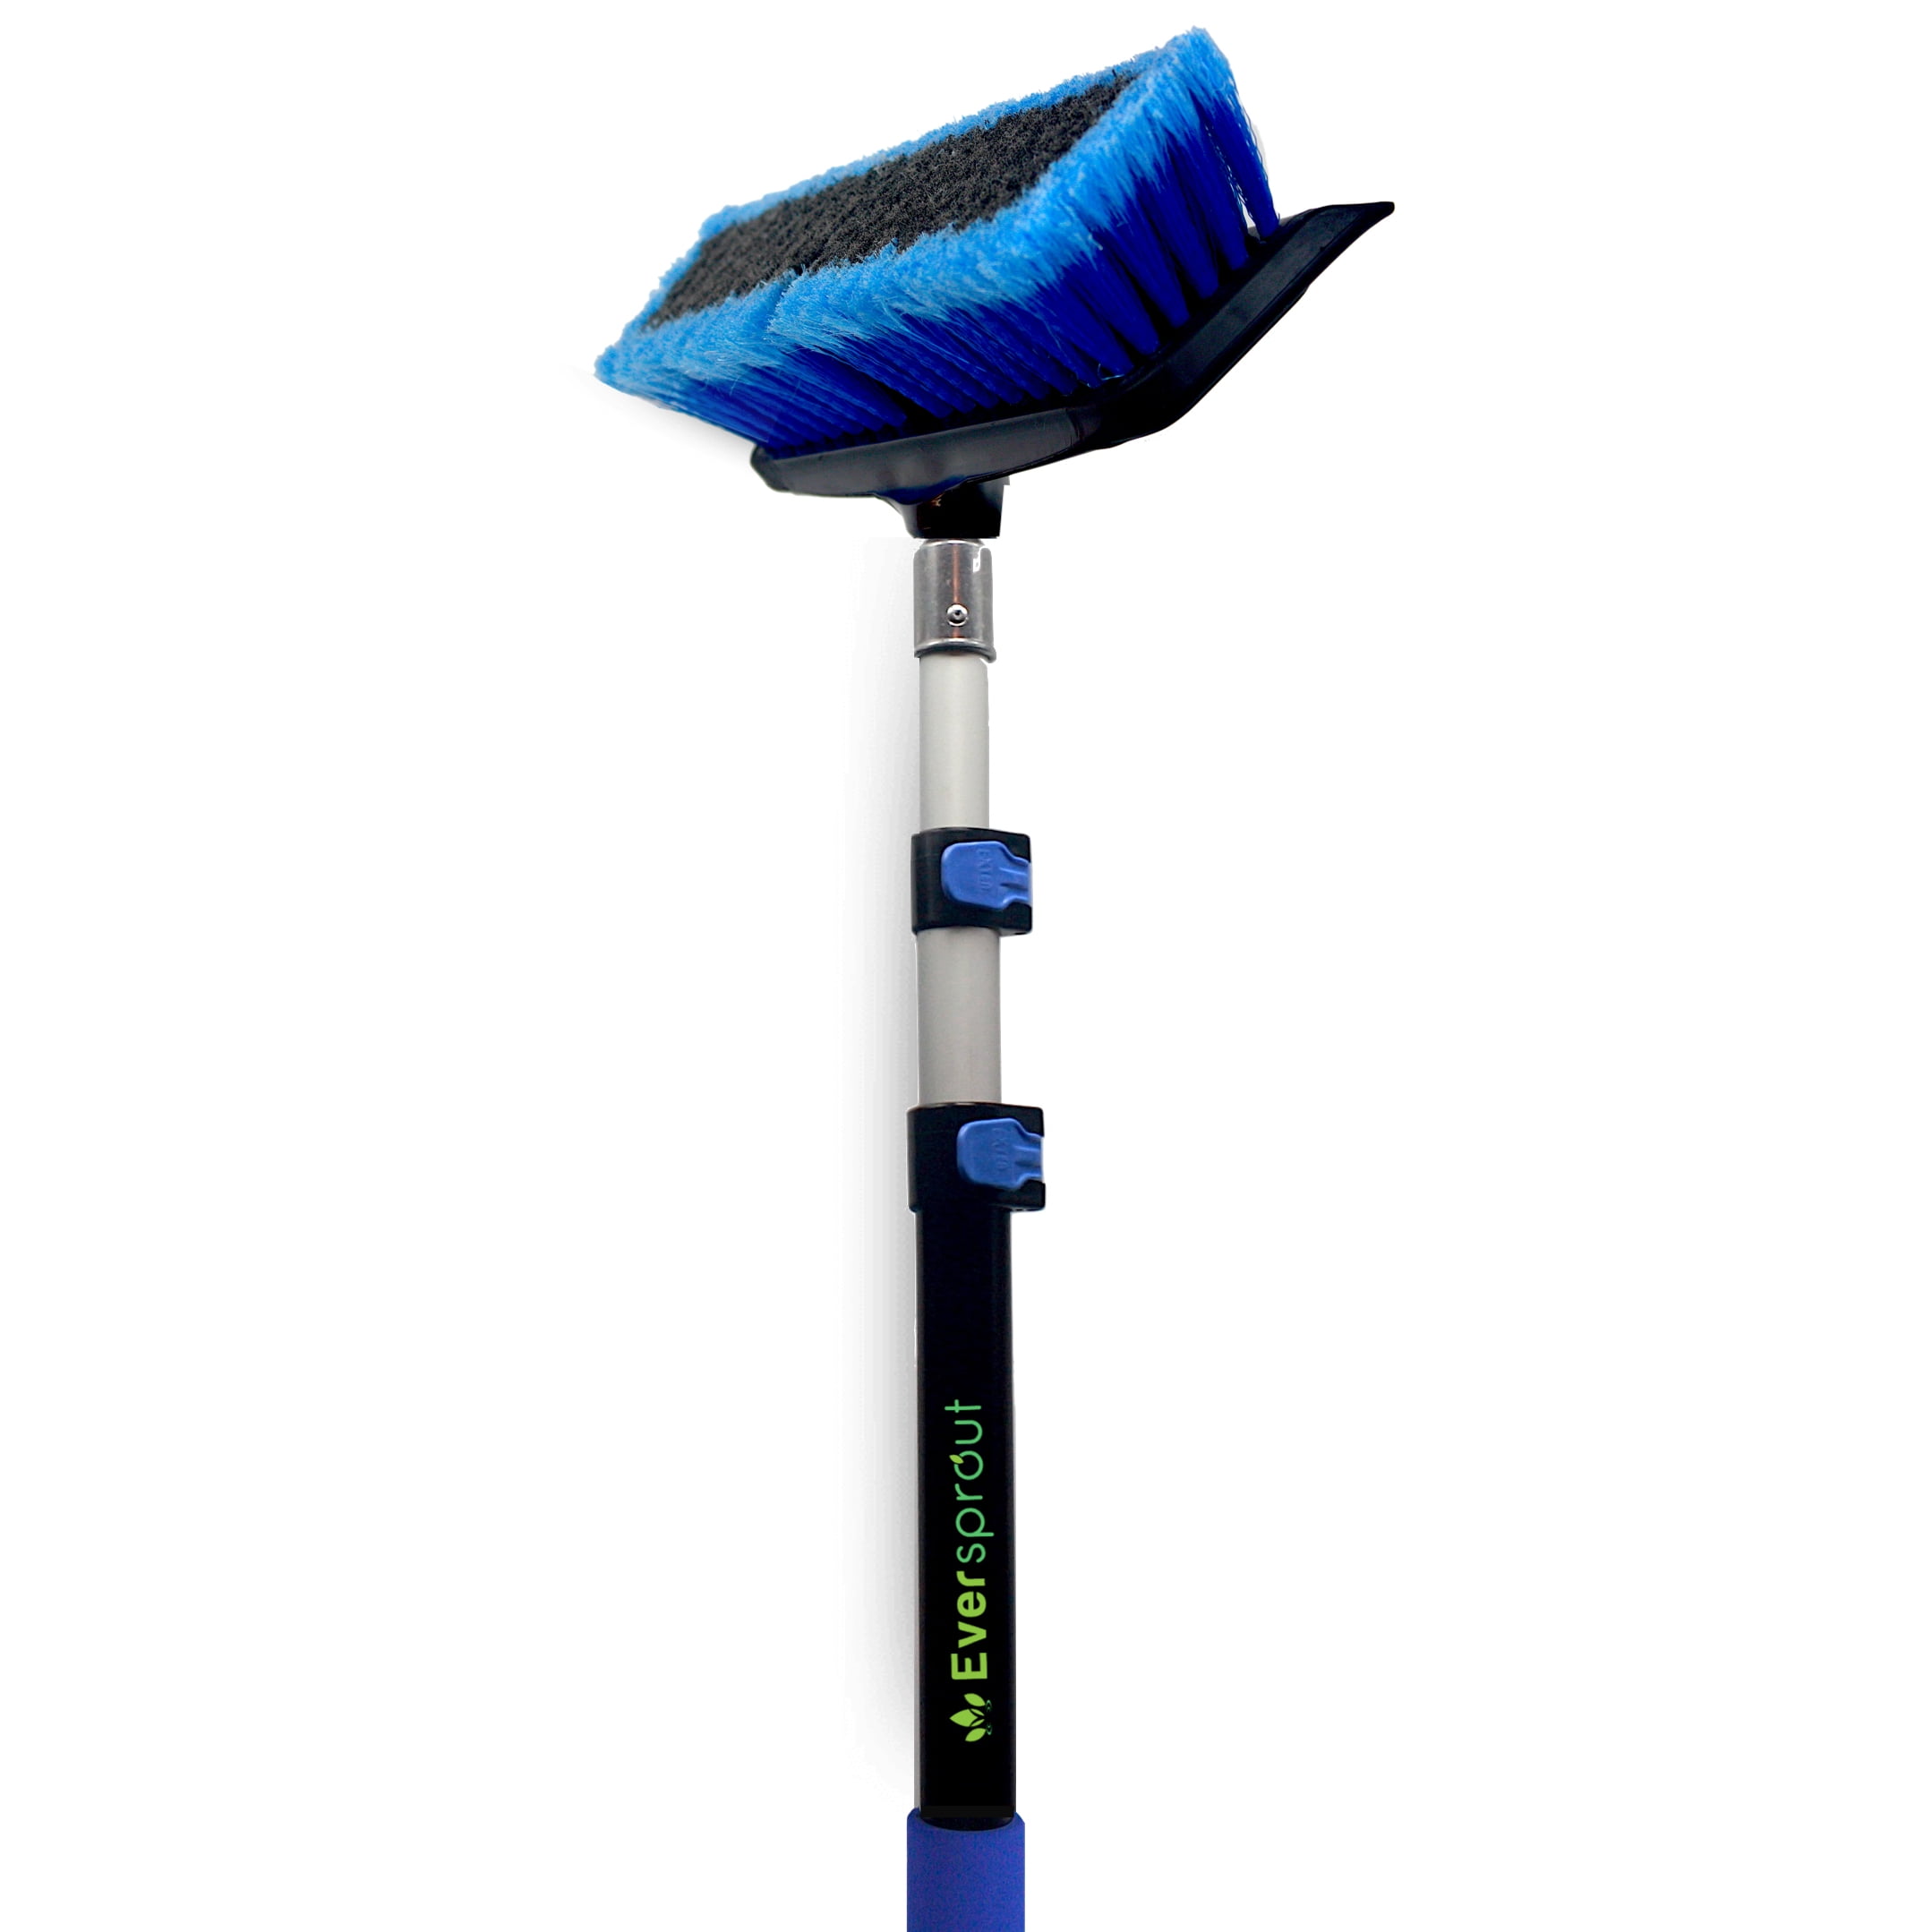 Eversprout 1.5-3 Foot Goliath Deck Stain Brush & Extension Pole Combo, Blue